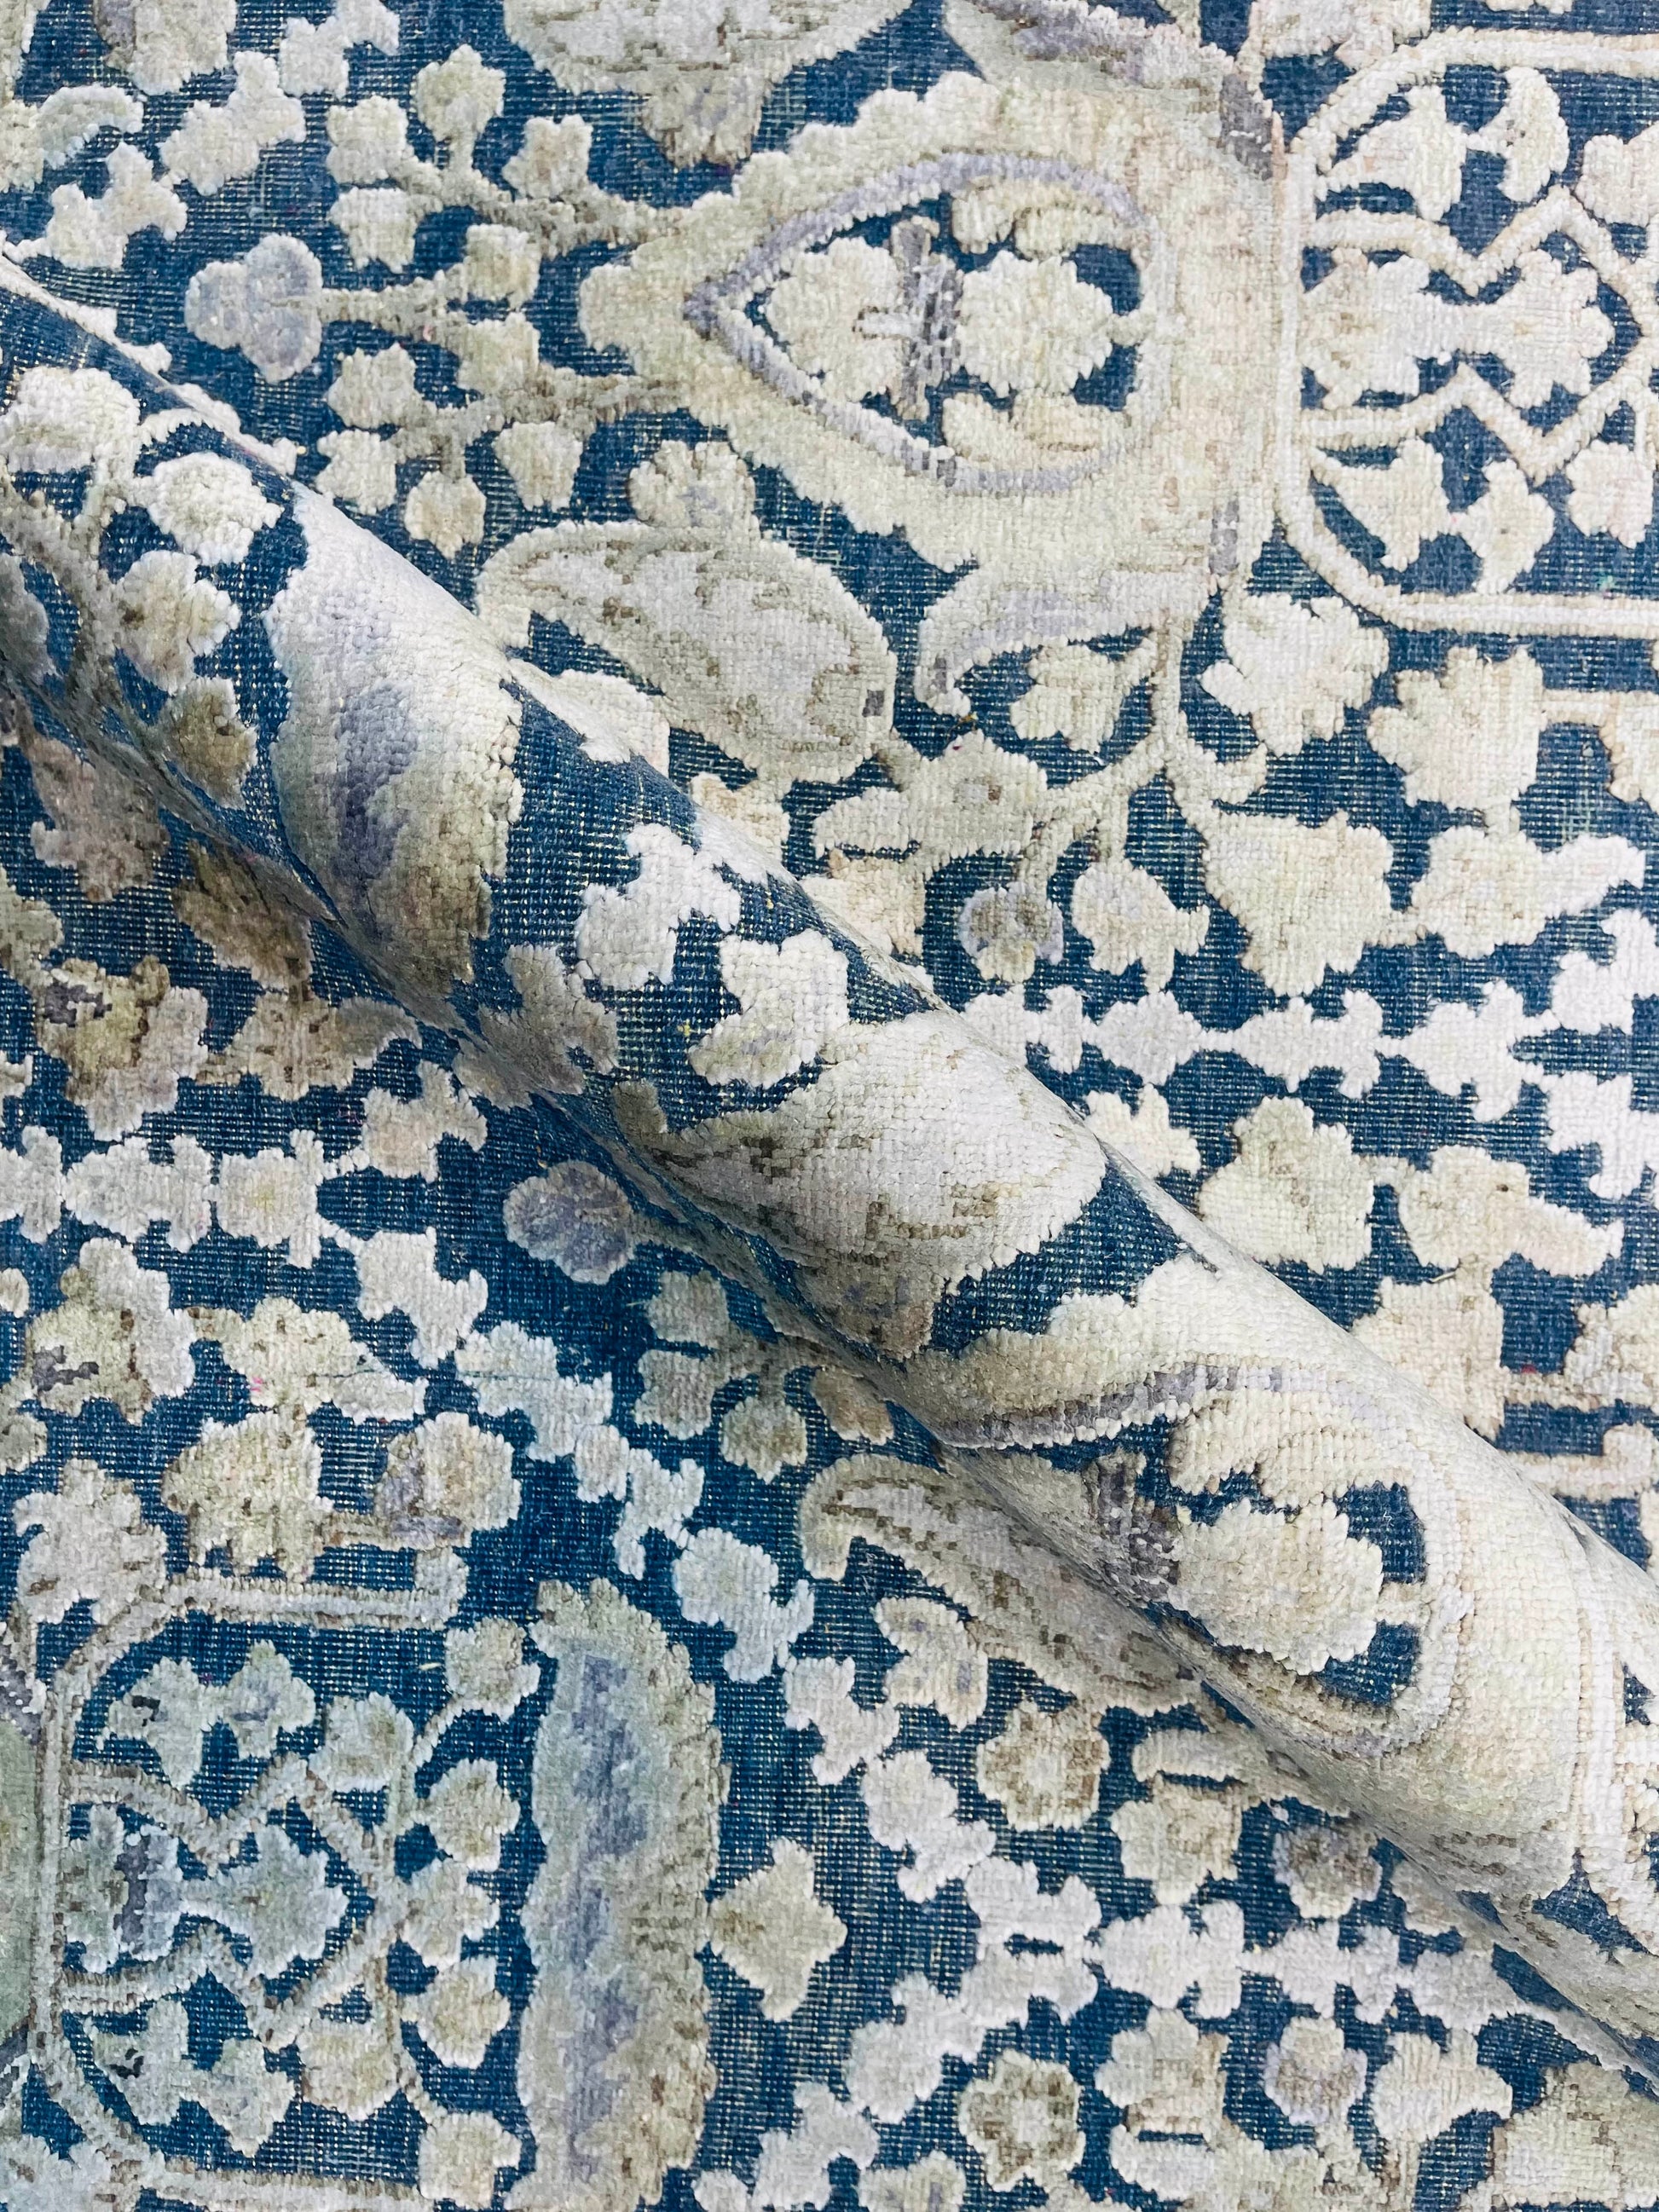 Get trendy with Ivory & Blue Viscose & Wool Contemporary Handknotted Area Rug 8.10x12.0ft 268x367Cms - Contemporary Rugs available at Jaipur Oriental Rugs. Grab yours for $4455.00 today!